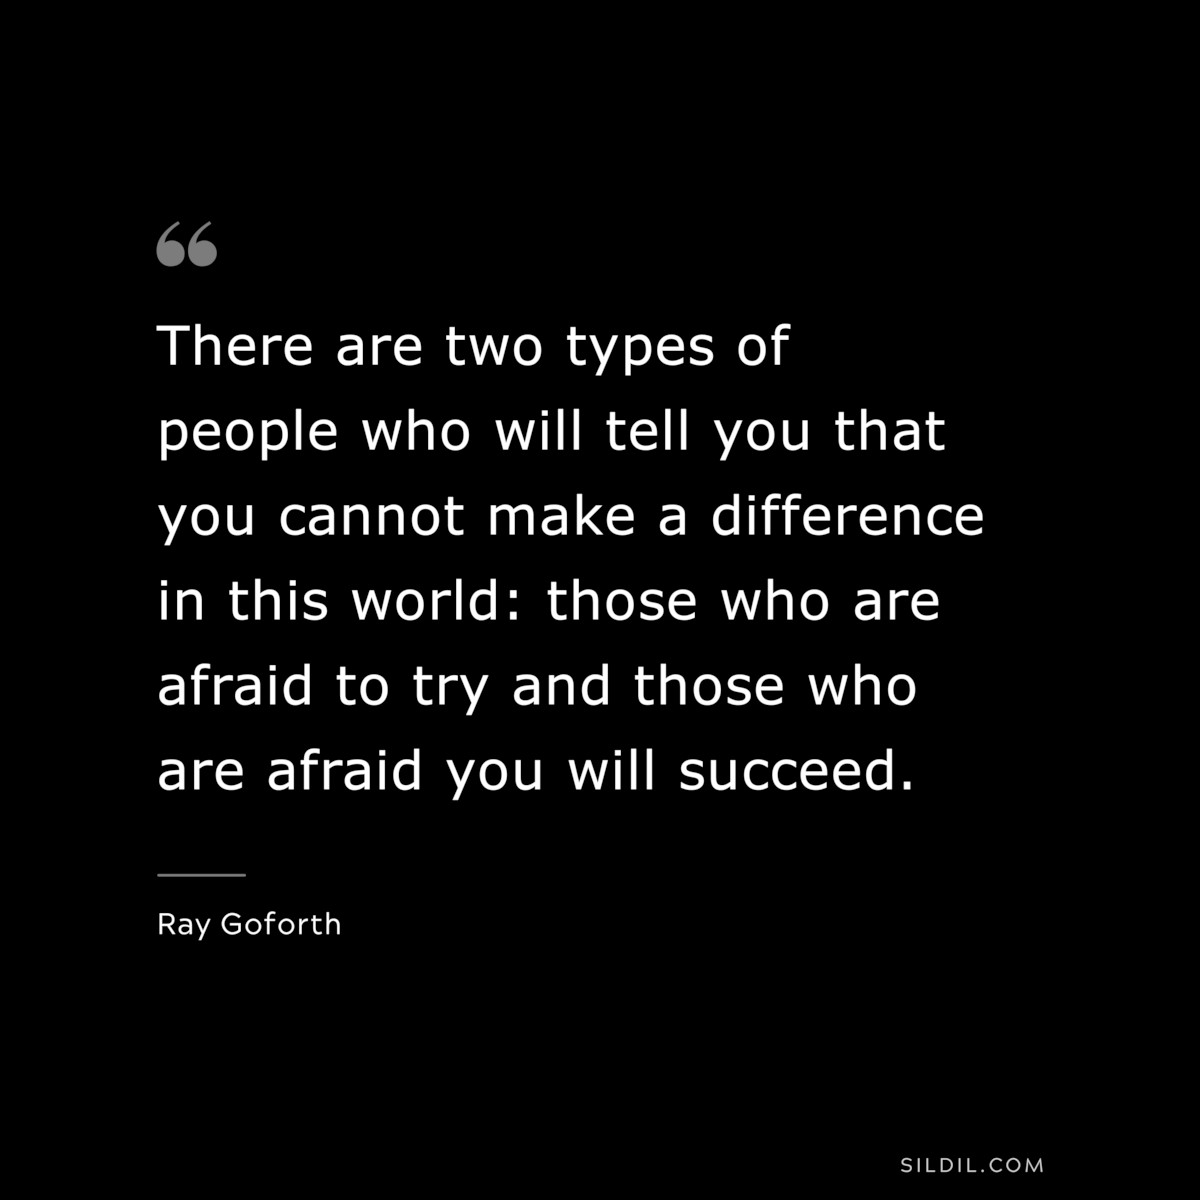 There are two types of people who will tell you that you cannot make a difference in this world: those who are afraid to try and those who are afraid you will succeed. ― Ray Goforth